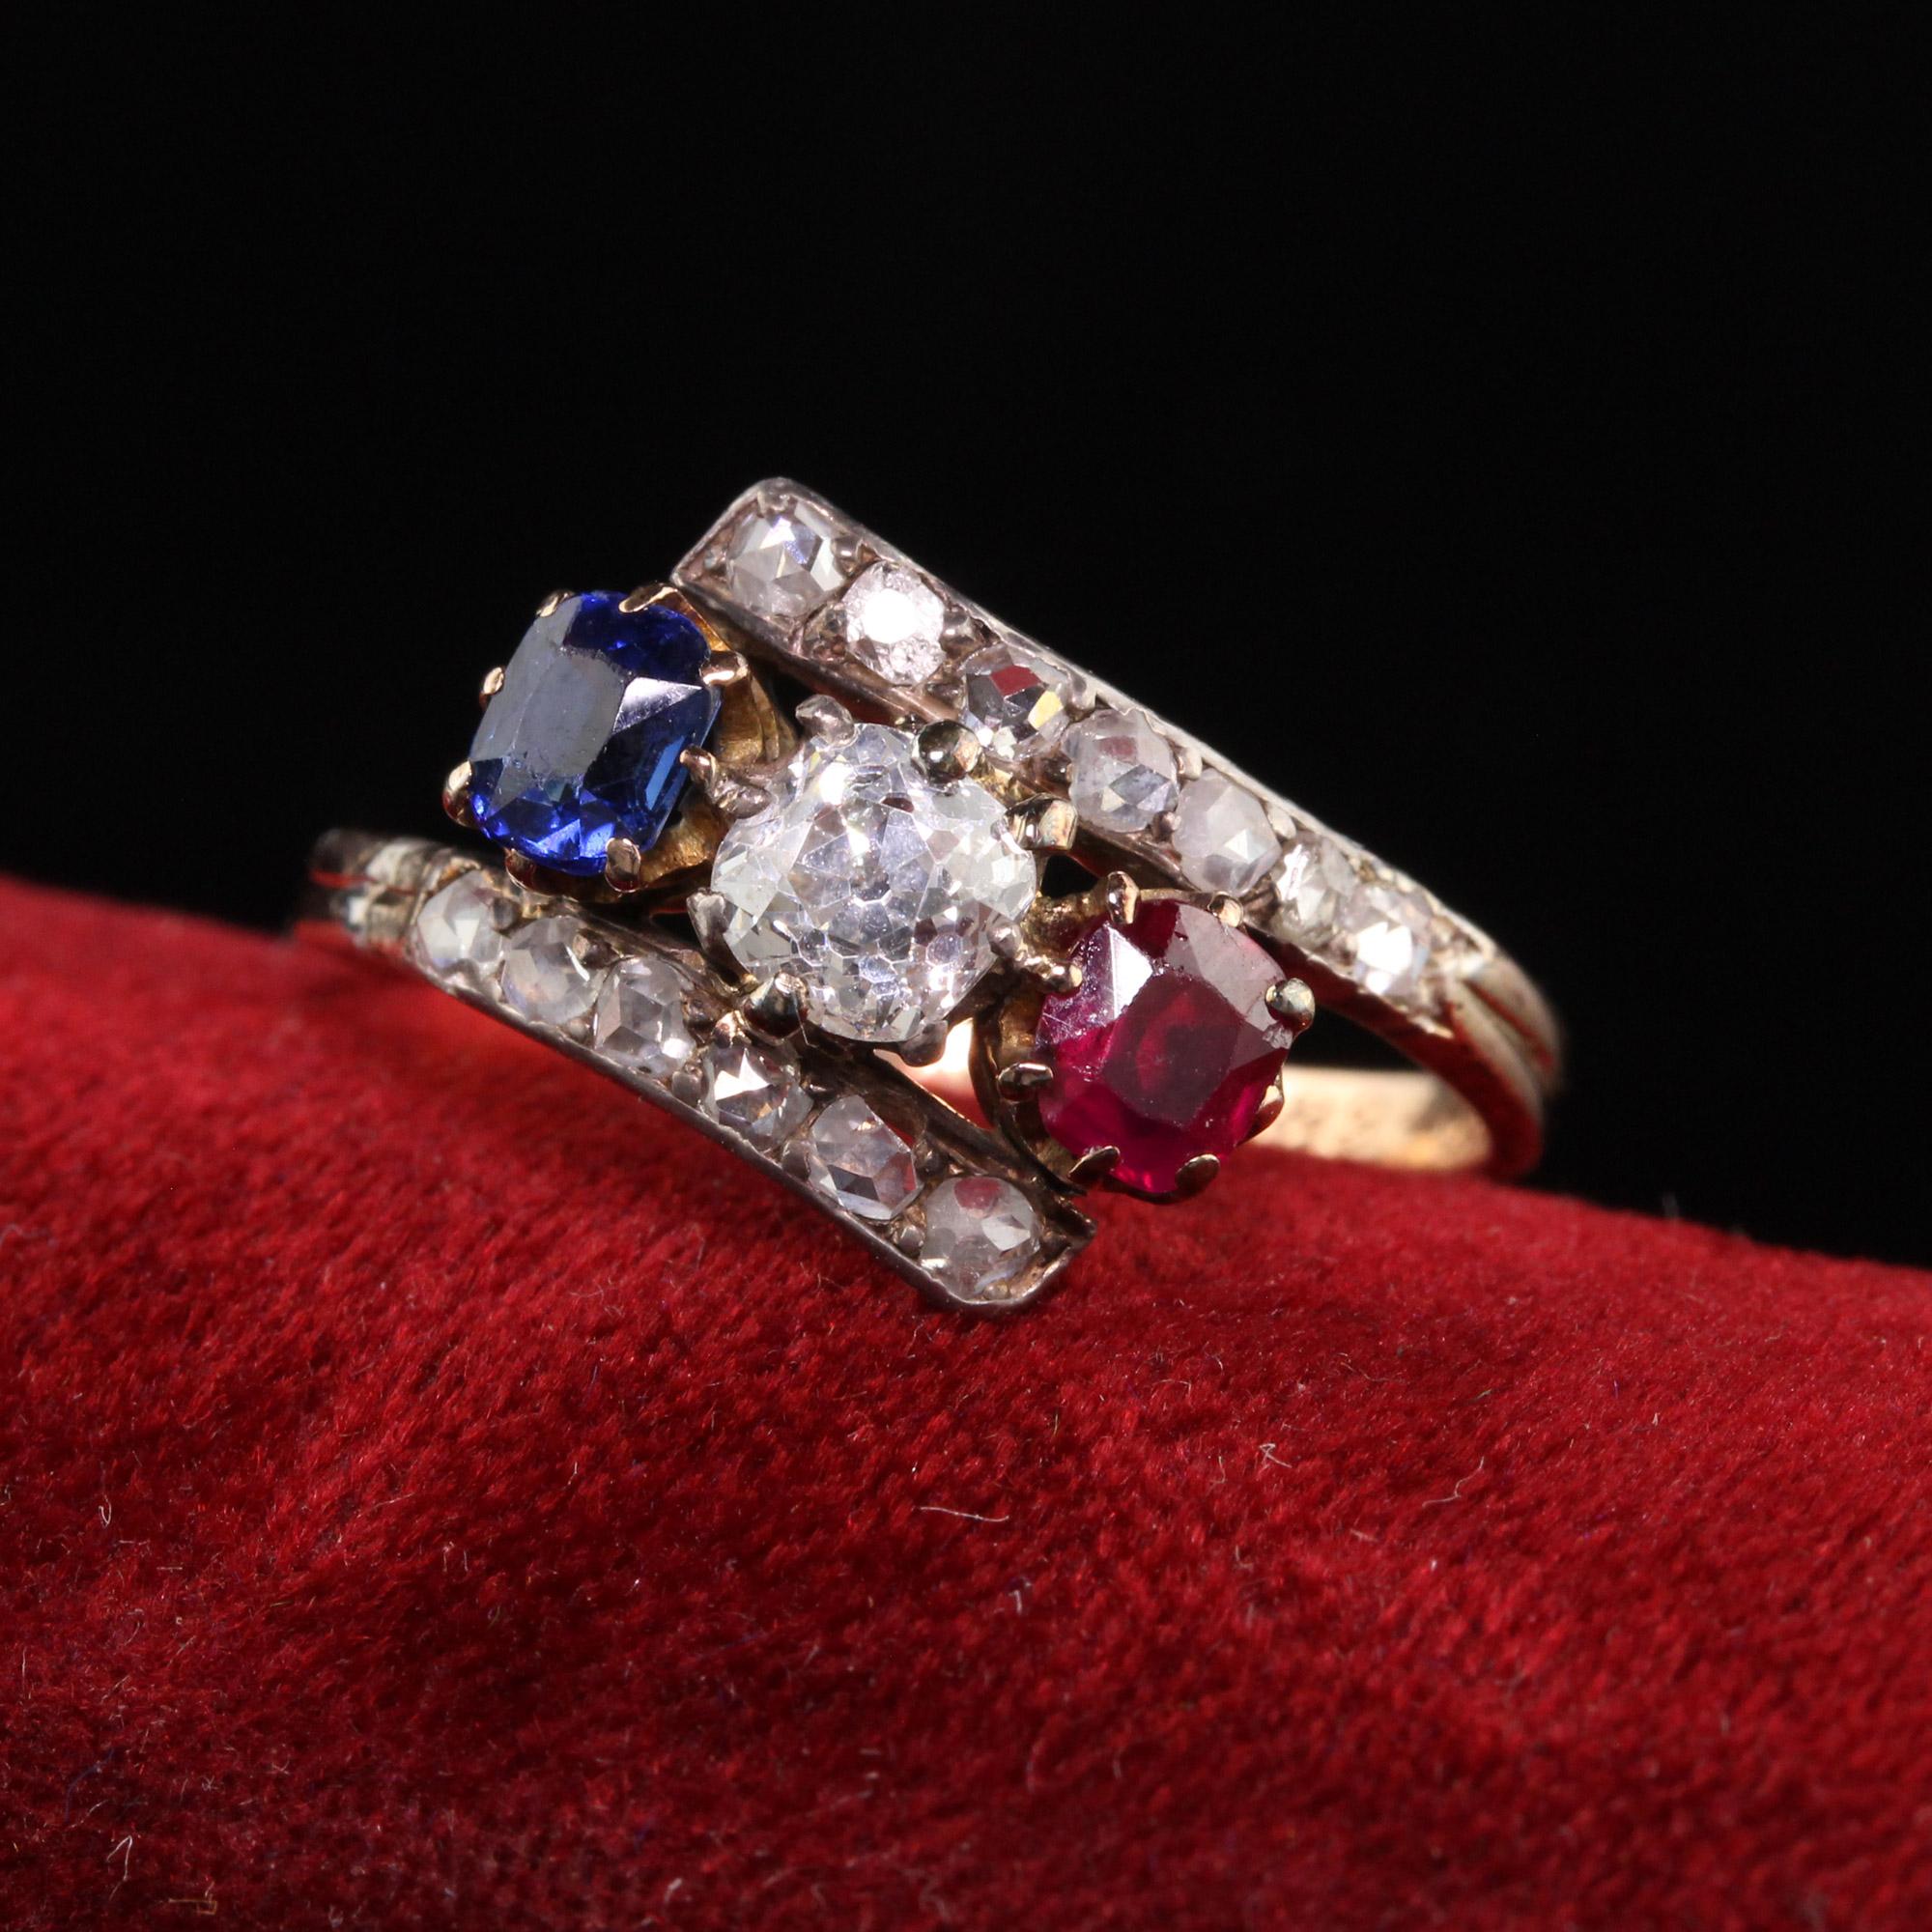 Beautiful Antique Victorian 18K Yellow Gold Diamond Ruby Sapphire Three Stone Ring. This incredible ring features an old mine cut diamond, natural ruby, and natural sapphire surrounded by chunky rose cut diamonds. They are set in a gorgeous